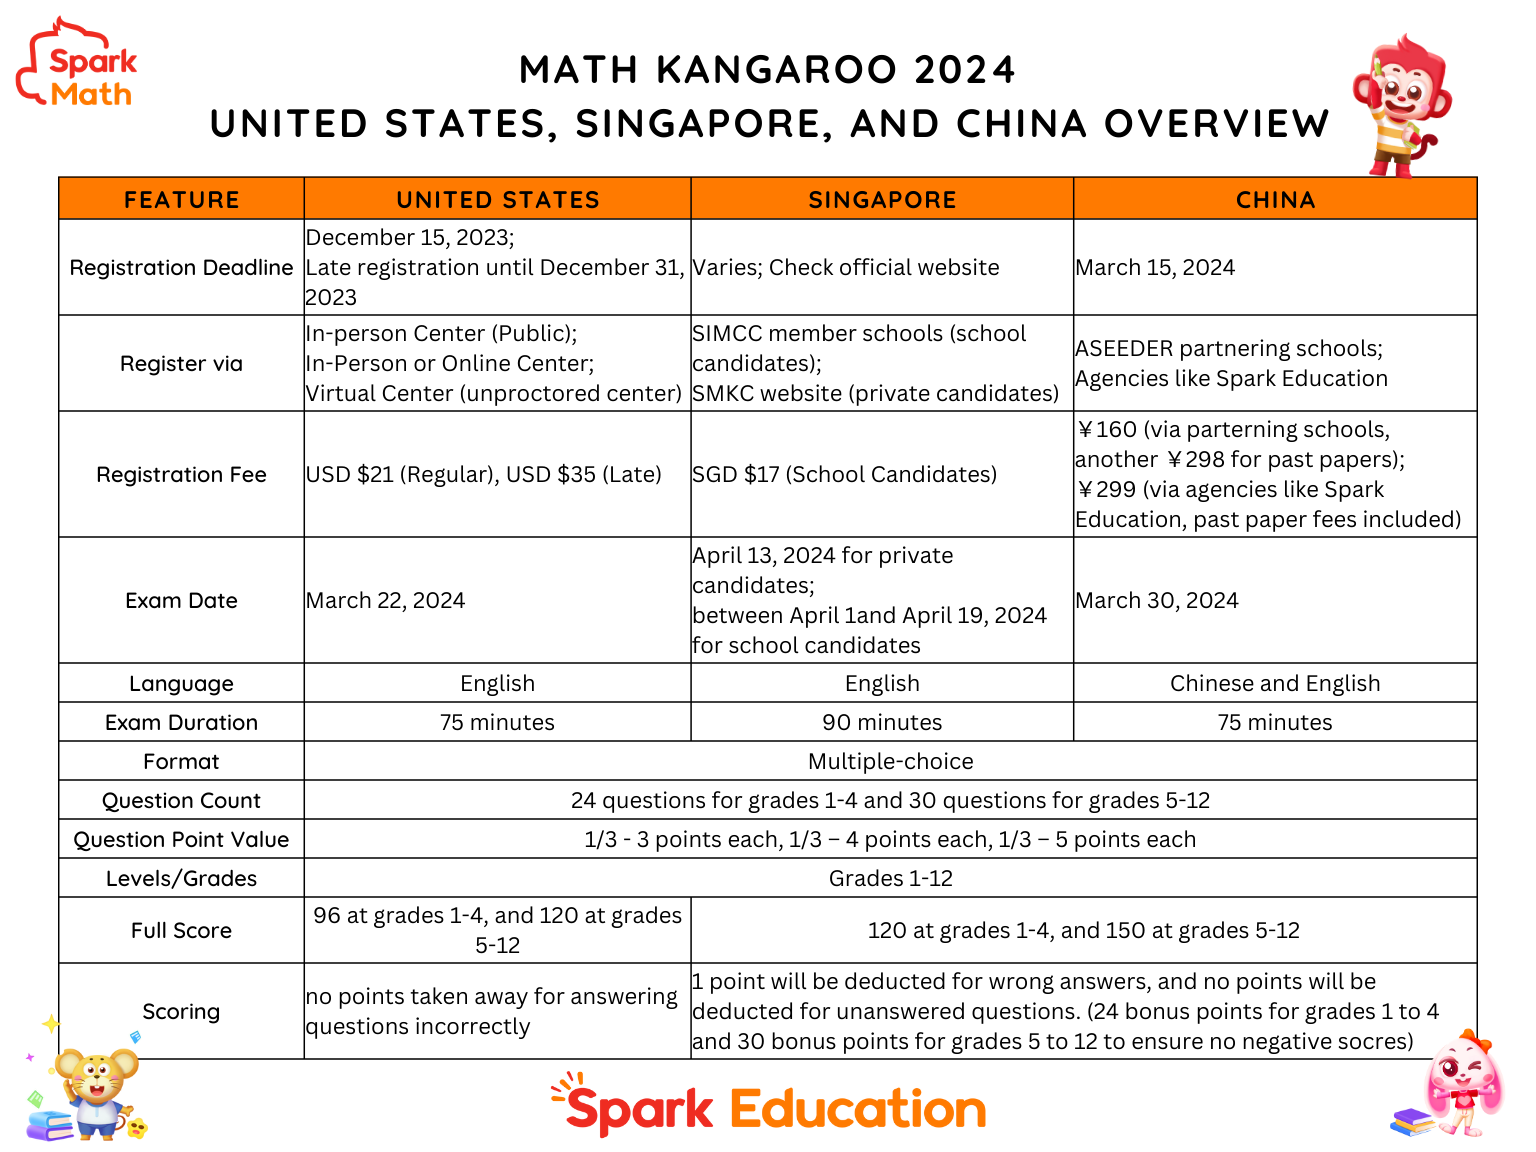 A Comparative Look at Competing in the Math Kangaroo USA, Singapore, and China